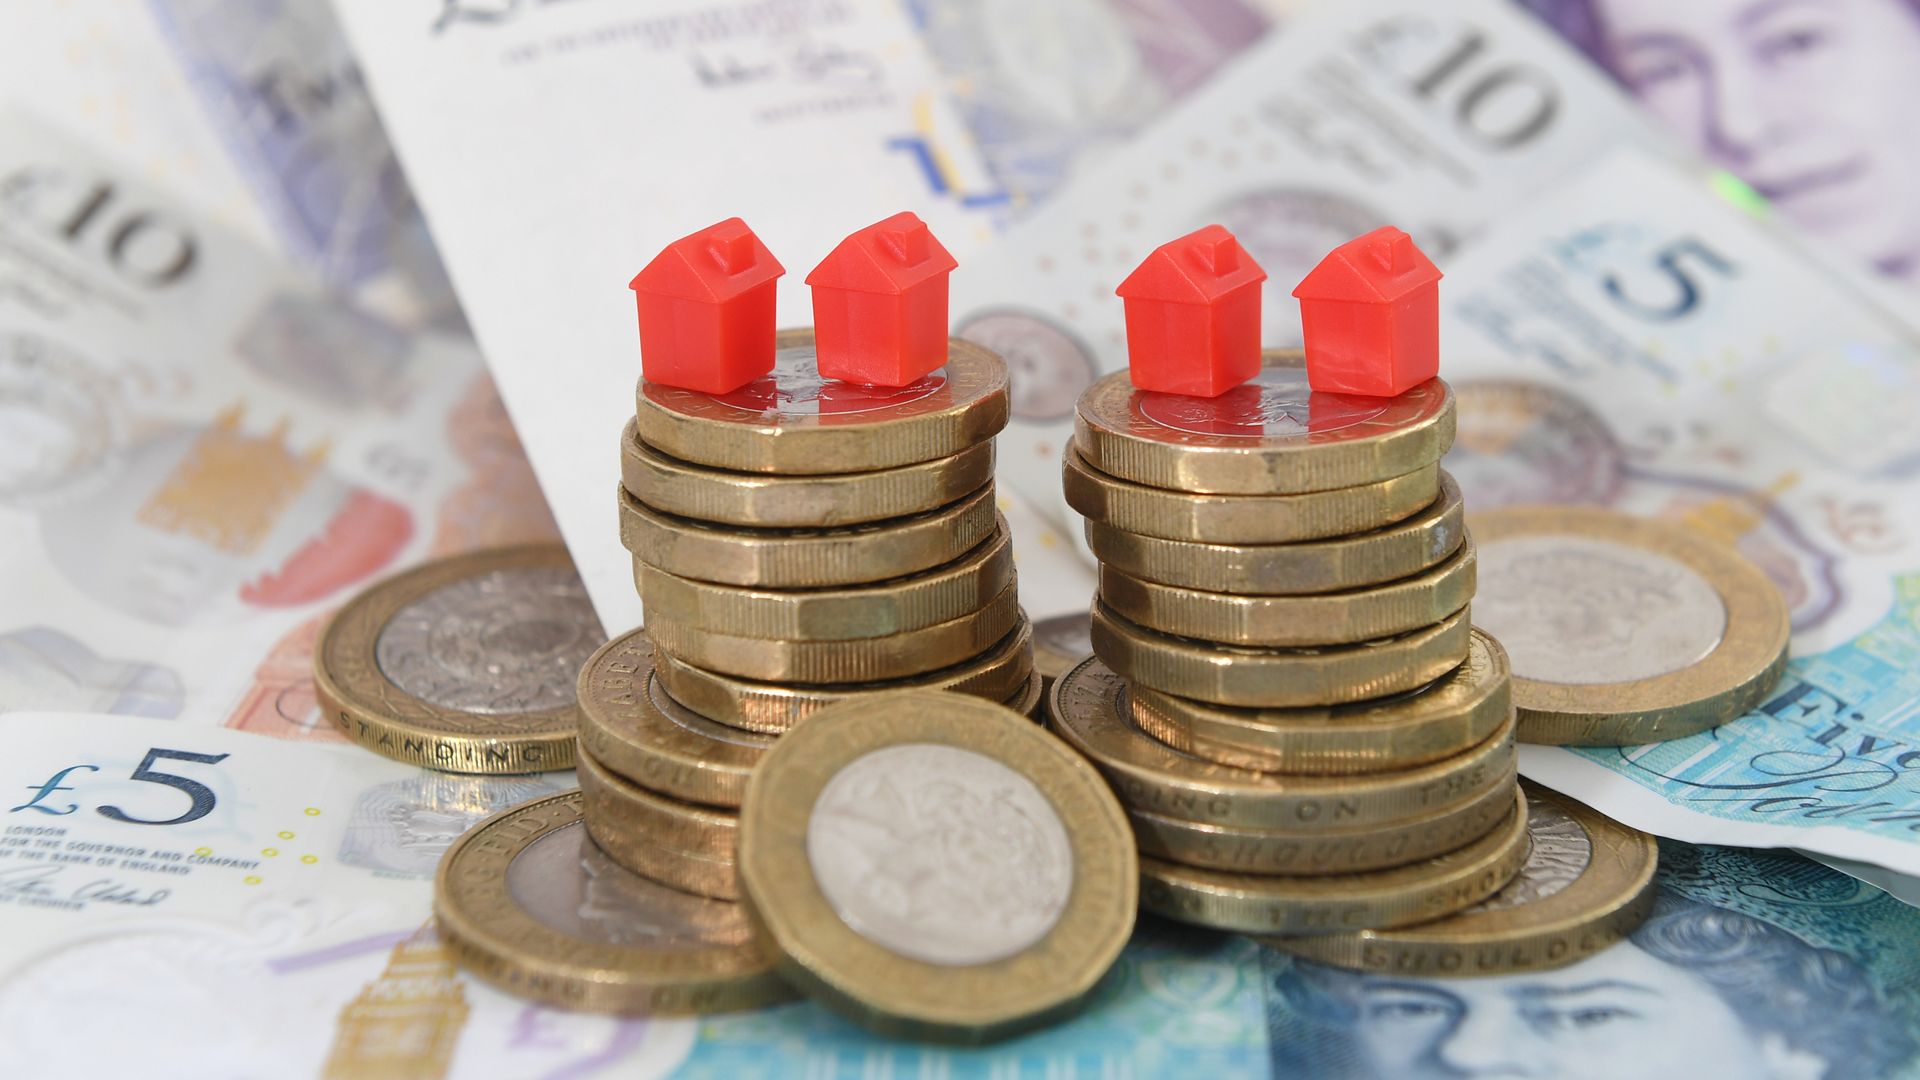 Fall in house prices as mortgage costs increase